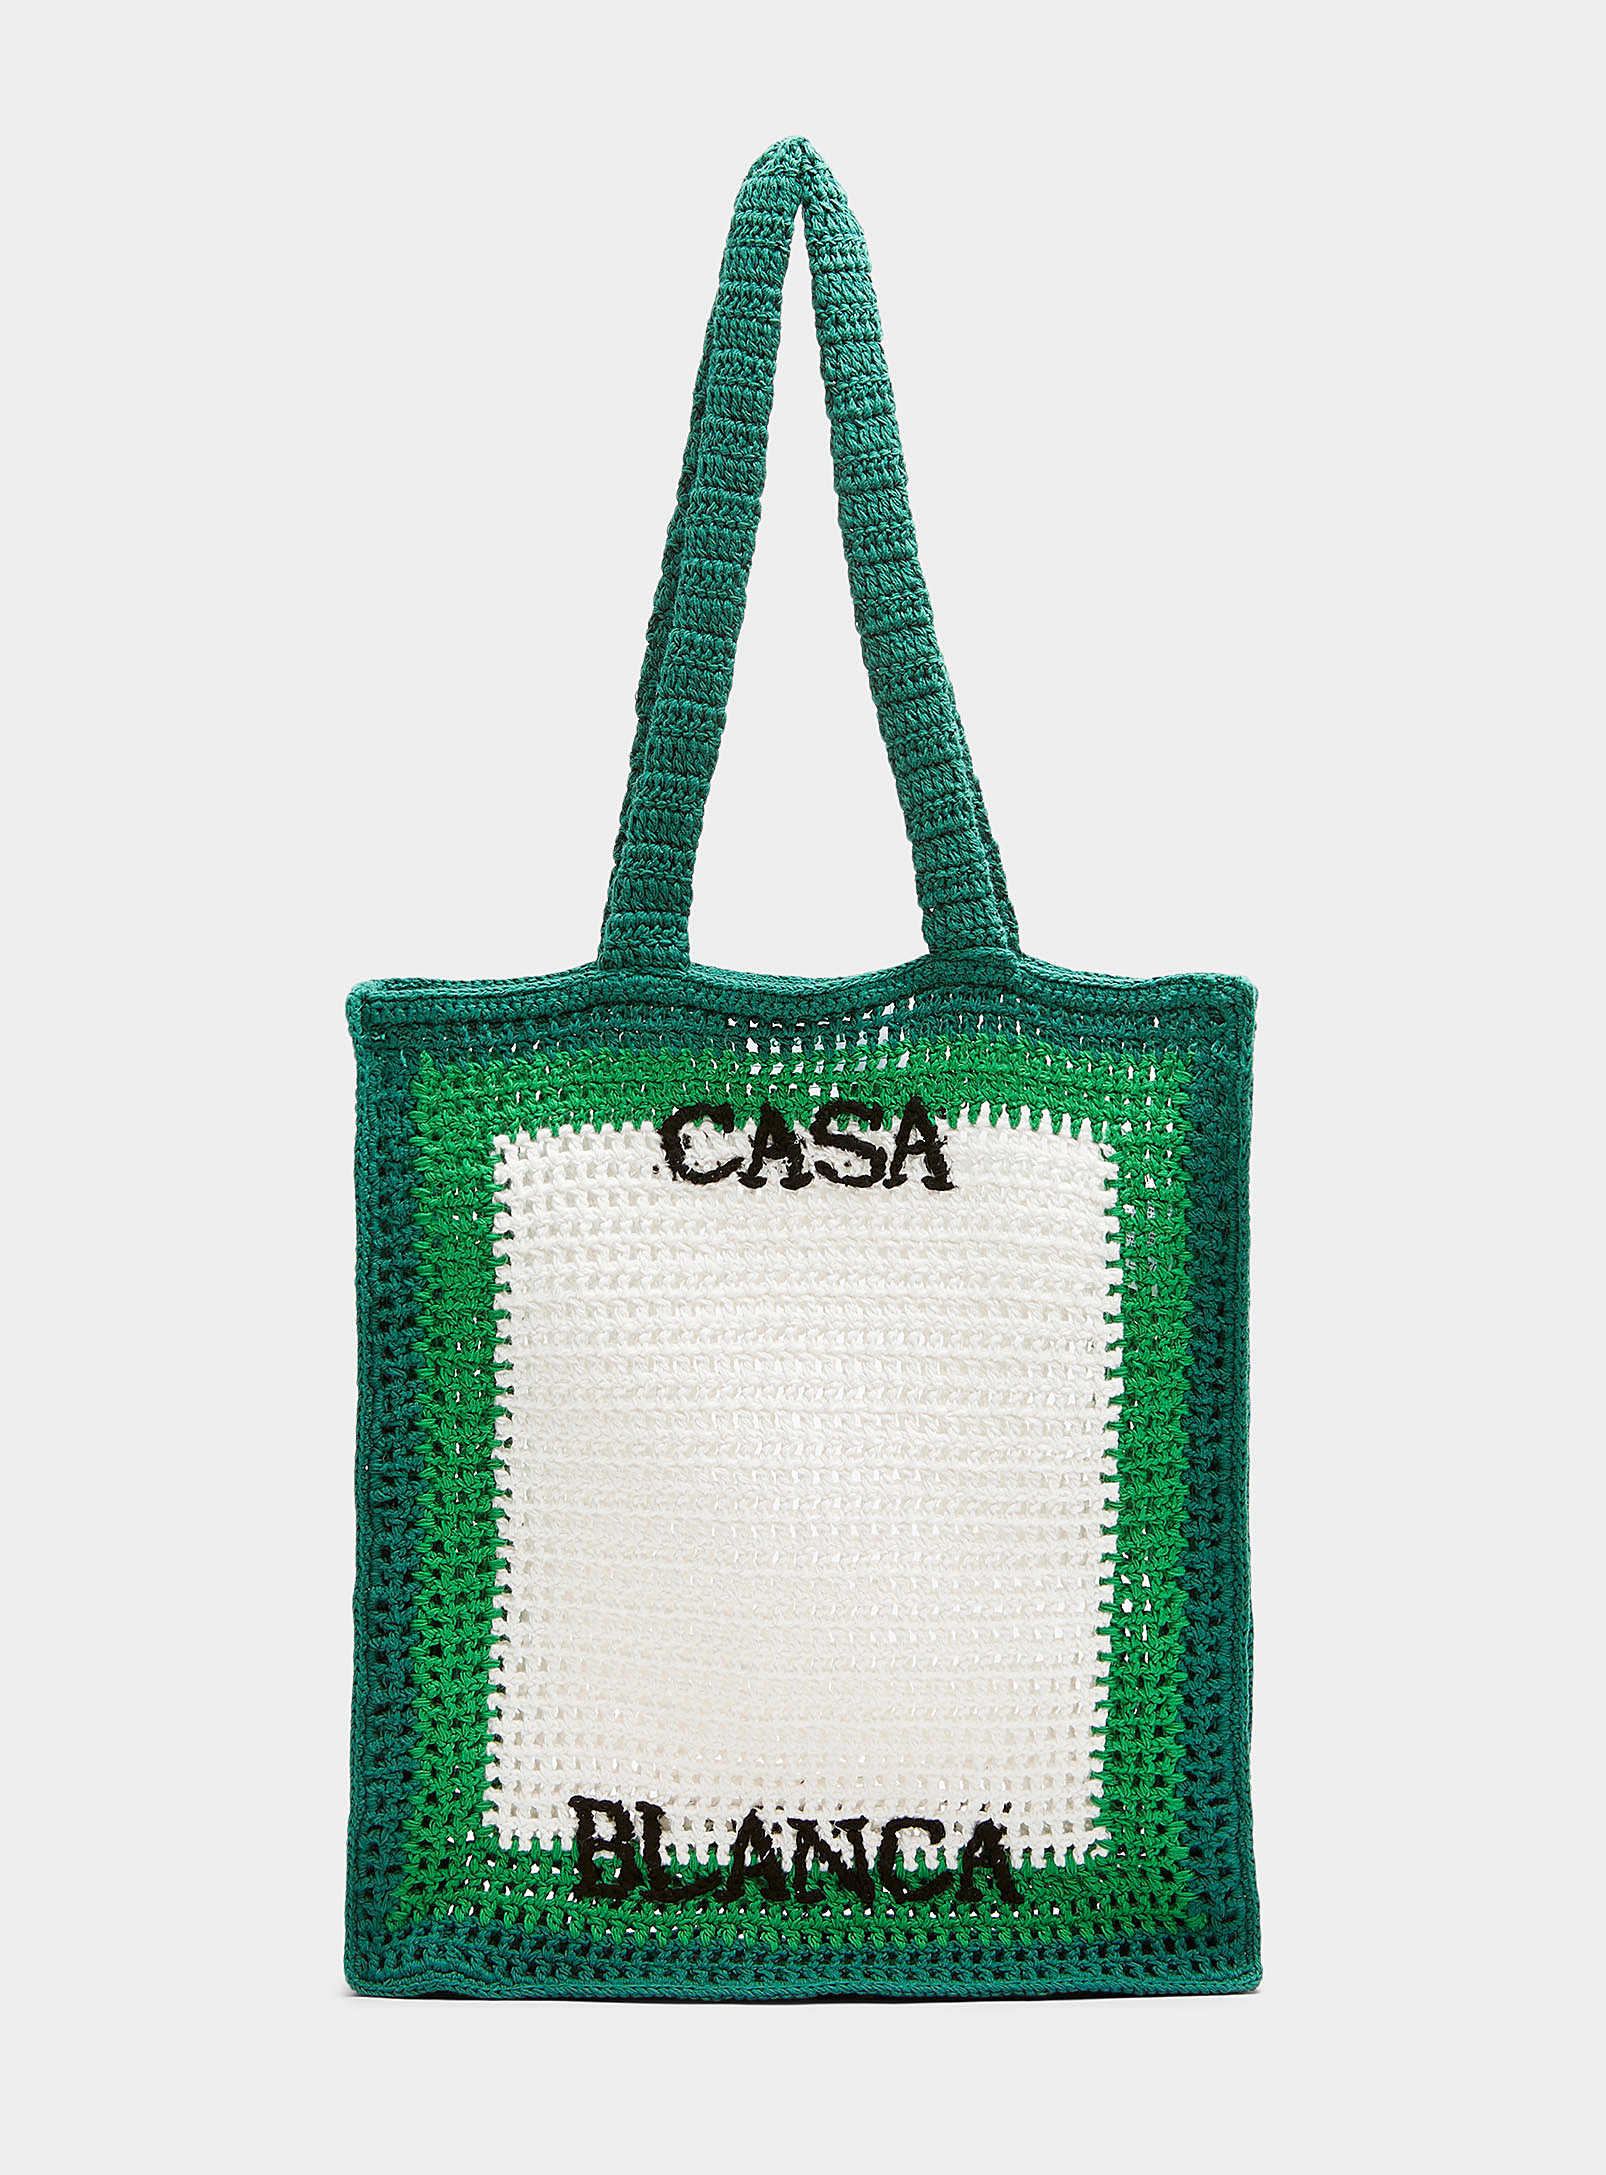 Casablanca Arch Crocheted Knit Bag In Patterned Green